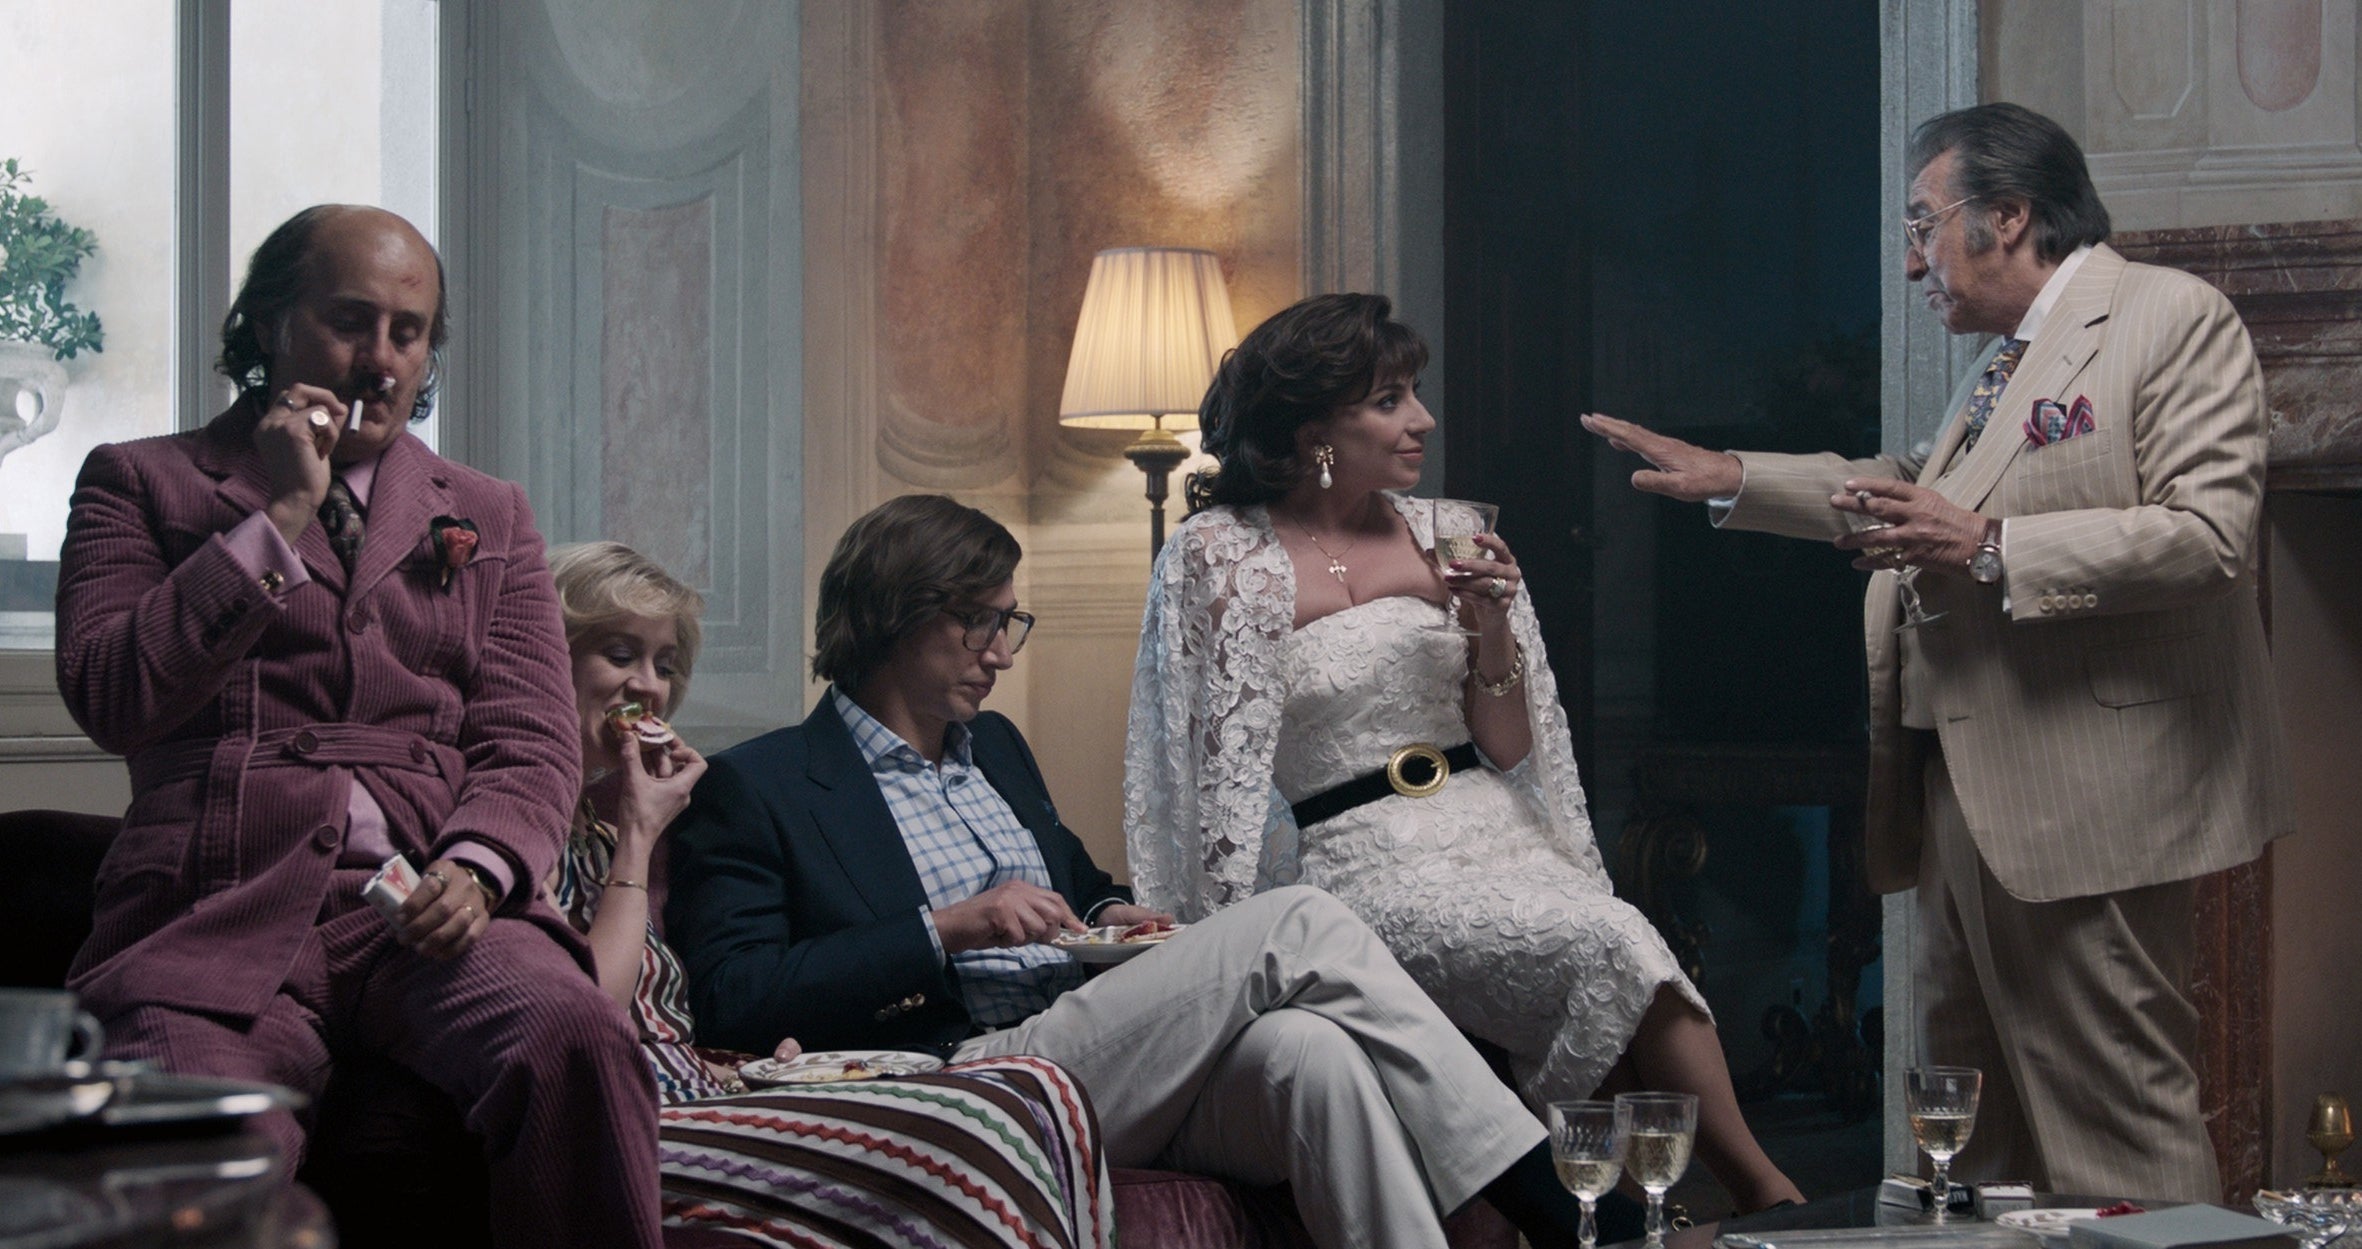 The Gucci family sits on a couch together in the film